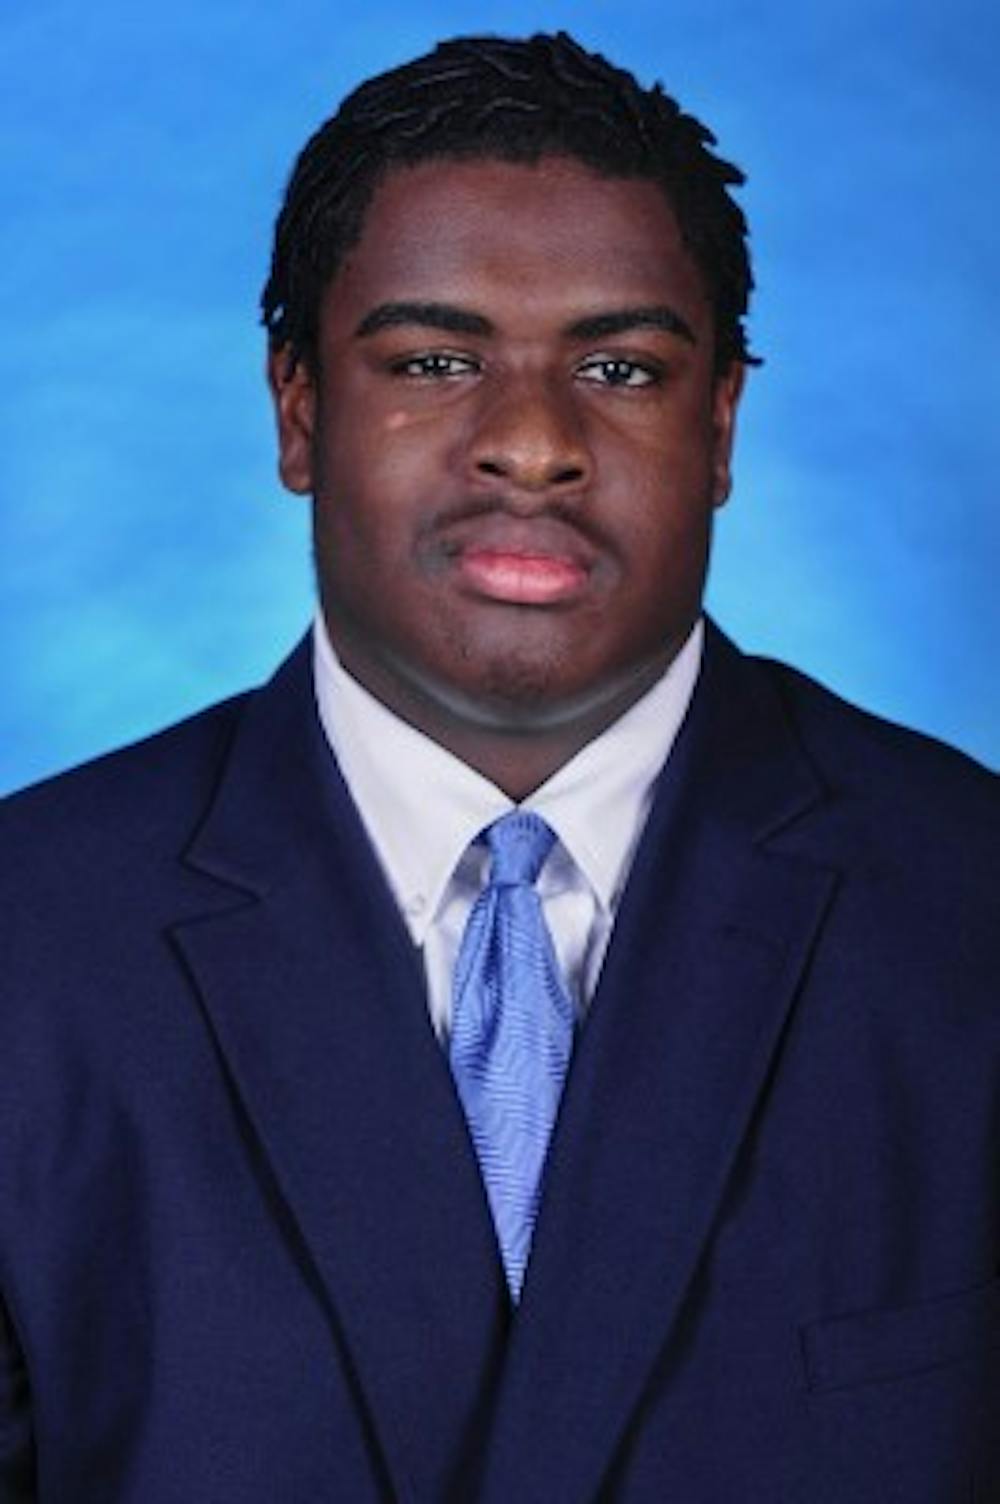 R.J. Prince is a redshirt sophomore offensive tackle for North Carolina.